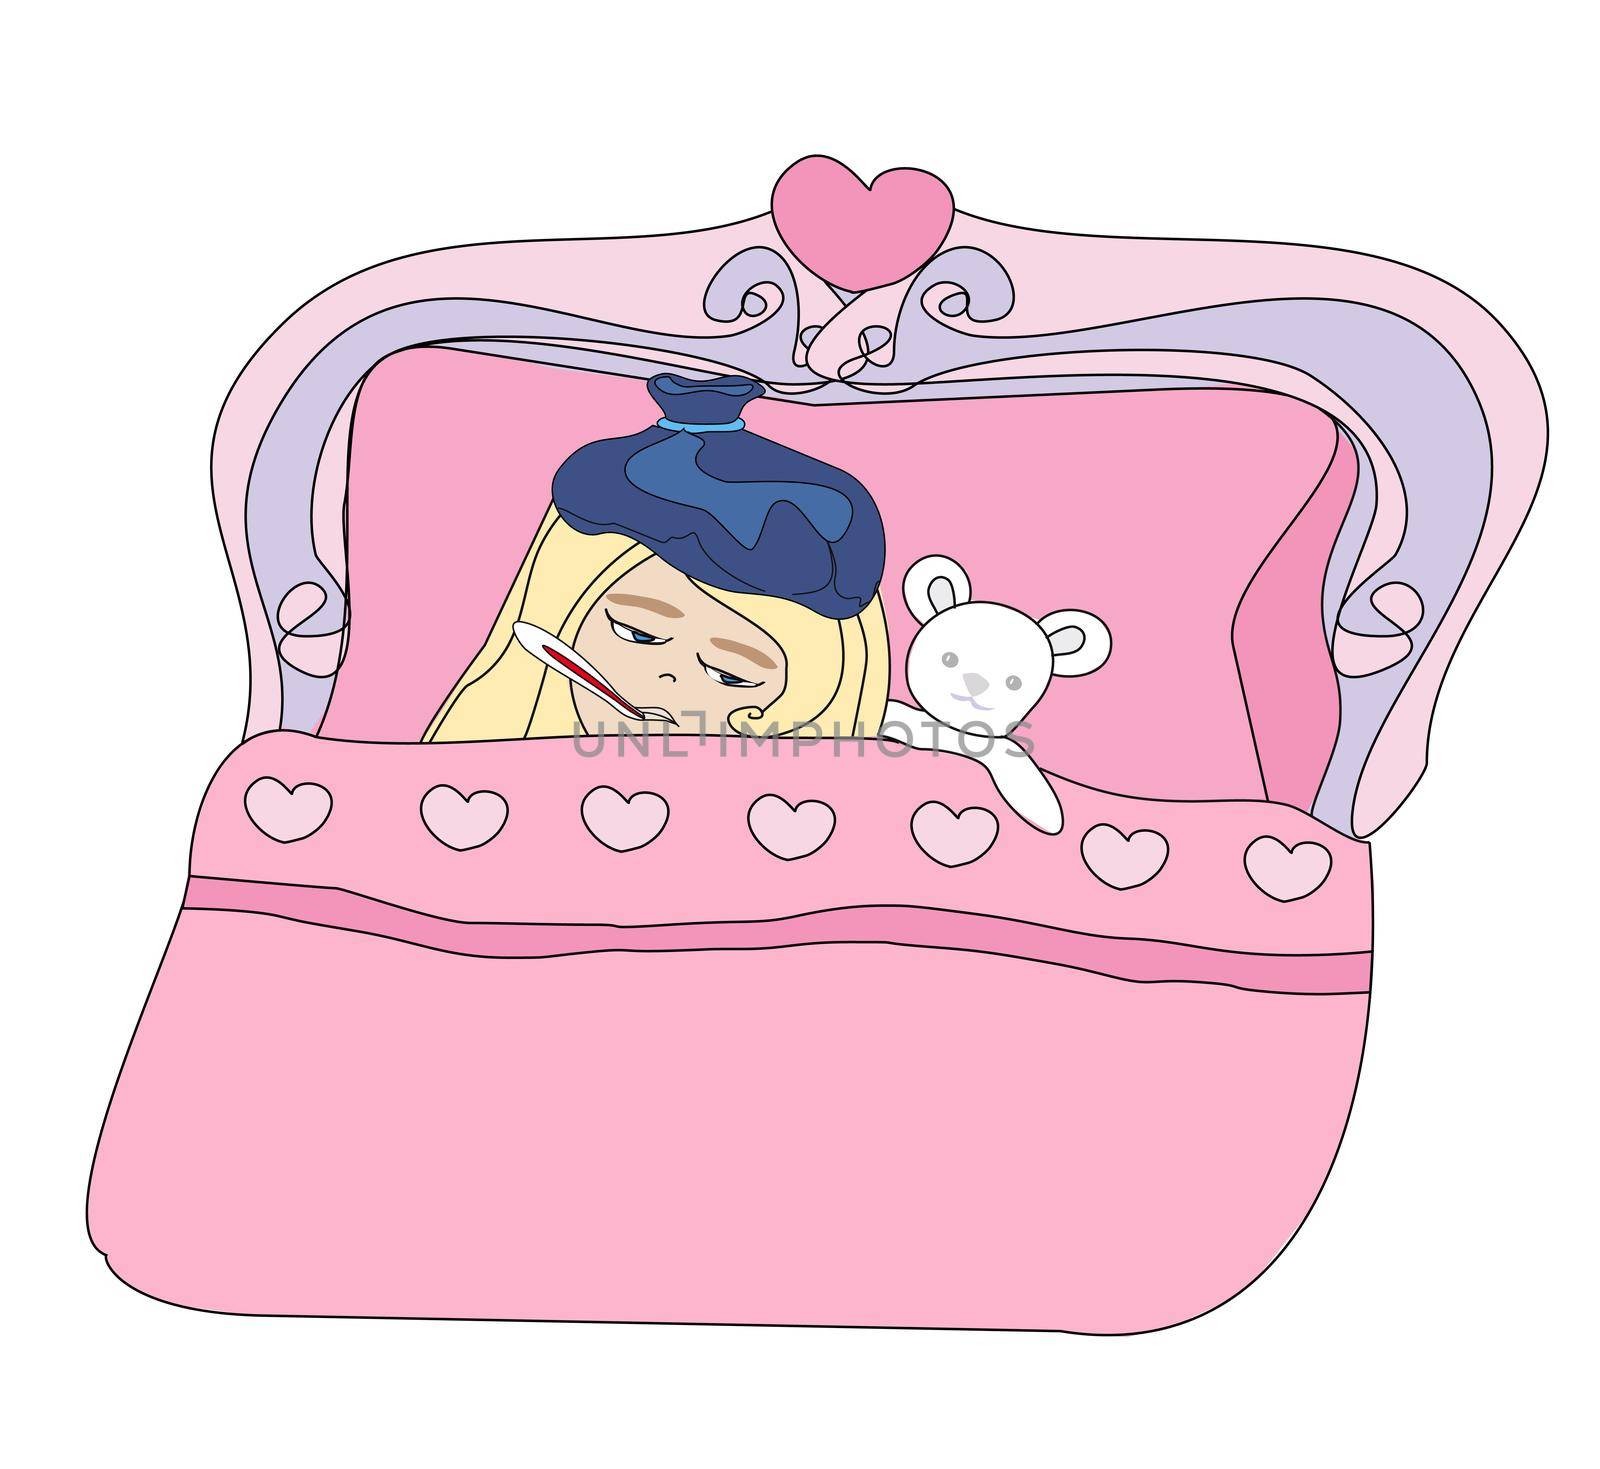 Illustration of a Sick Girl lying in bed by JackyBrown